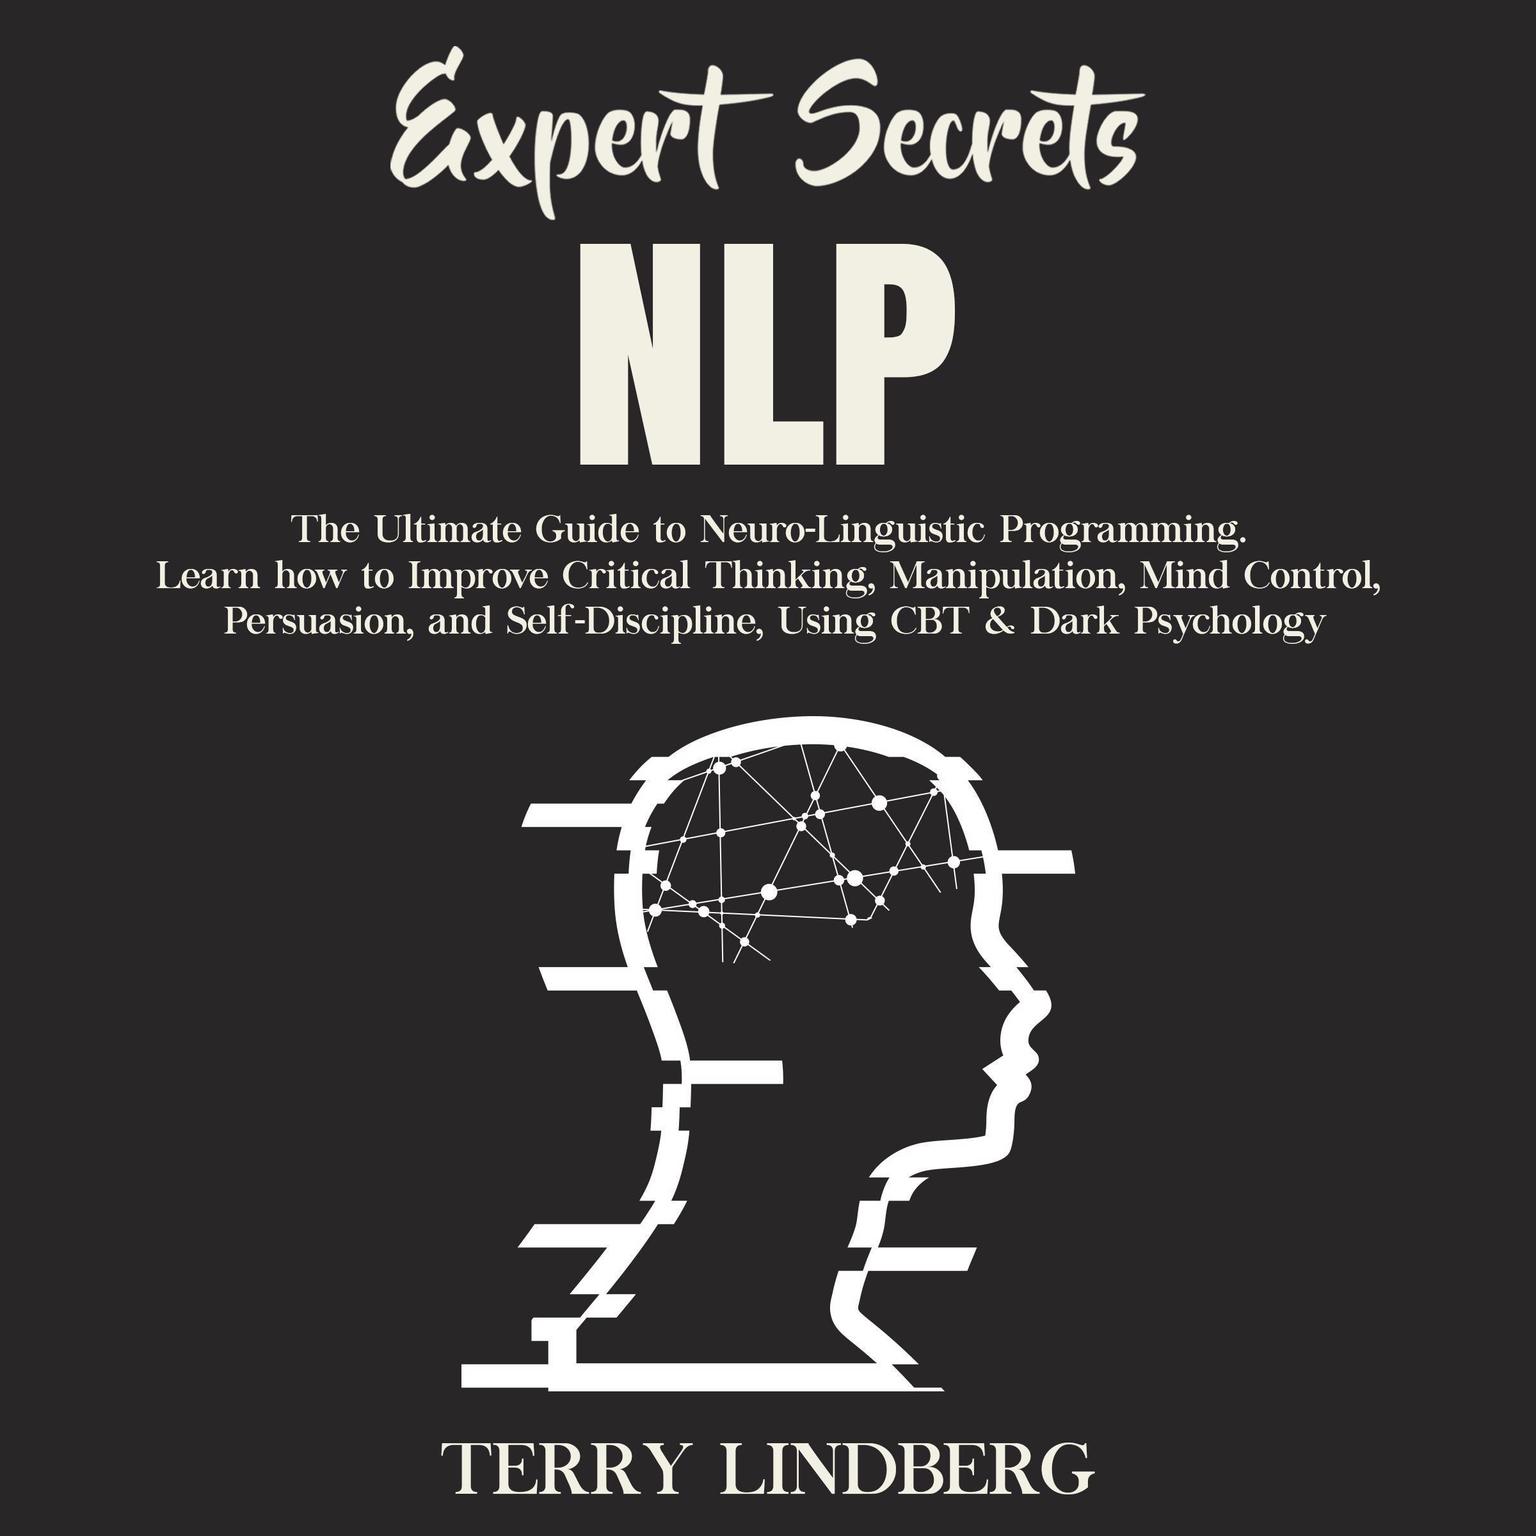 Expert Secrets – NLP: The Ultimate Guide for Neuro-Linguistic Programming Learn how to Improve Critical Thinking, Manipulation, Mind Control, Persuasion, and Self-Discipline, Using CBT & Dark Psychology. Audiobook, by Terry Lindberg